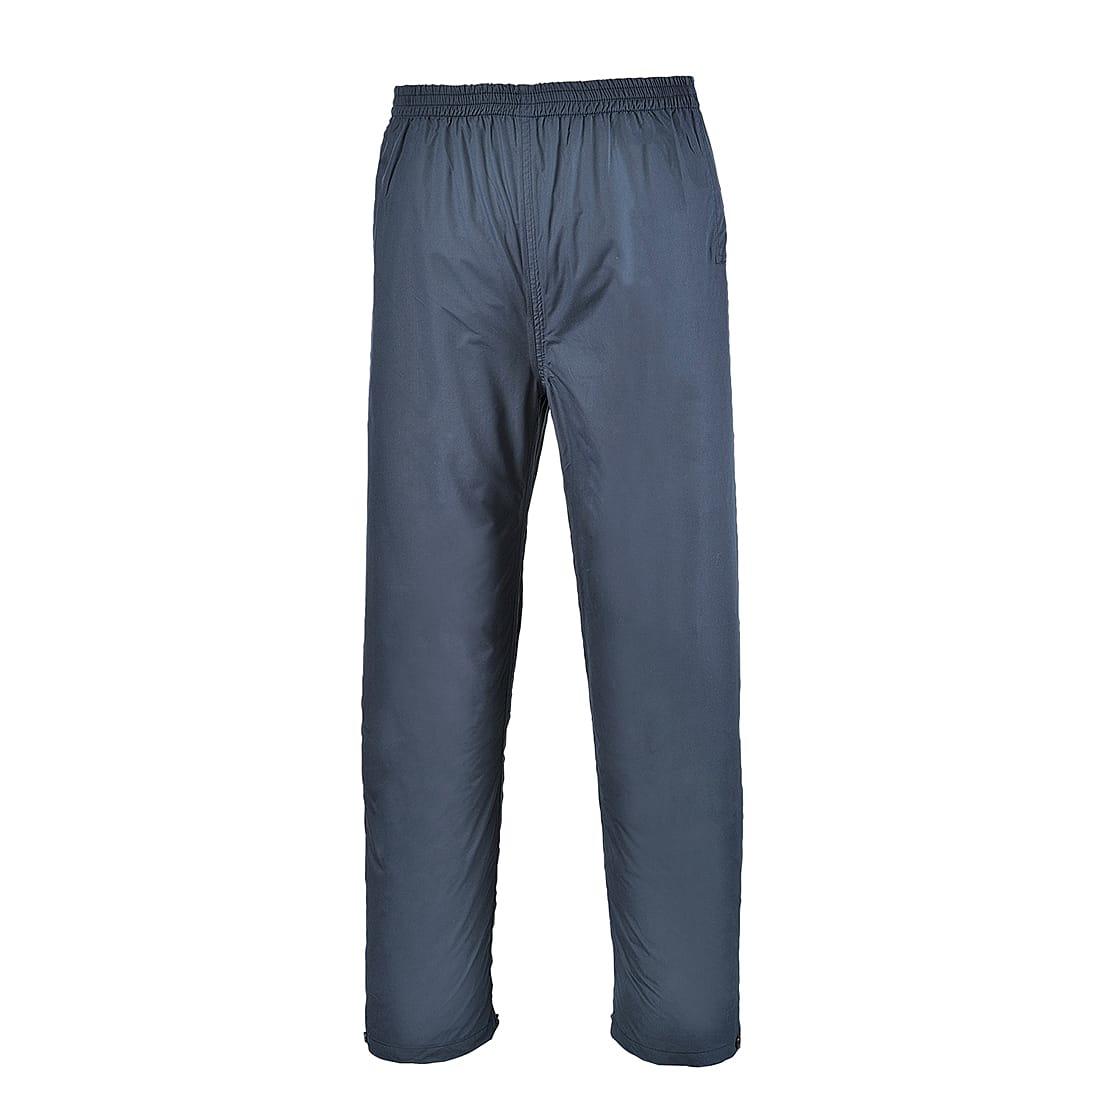 Portwest Ayr Breathable Trousers in Navy (Product Code: S536)